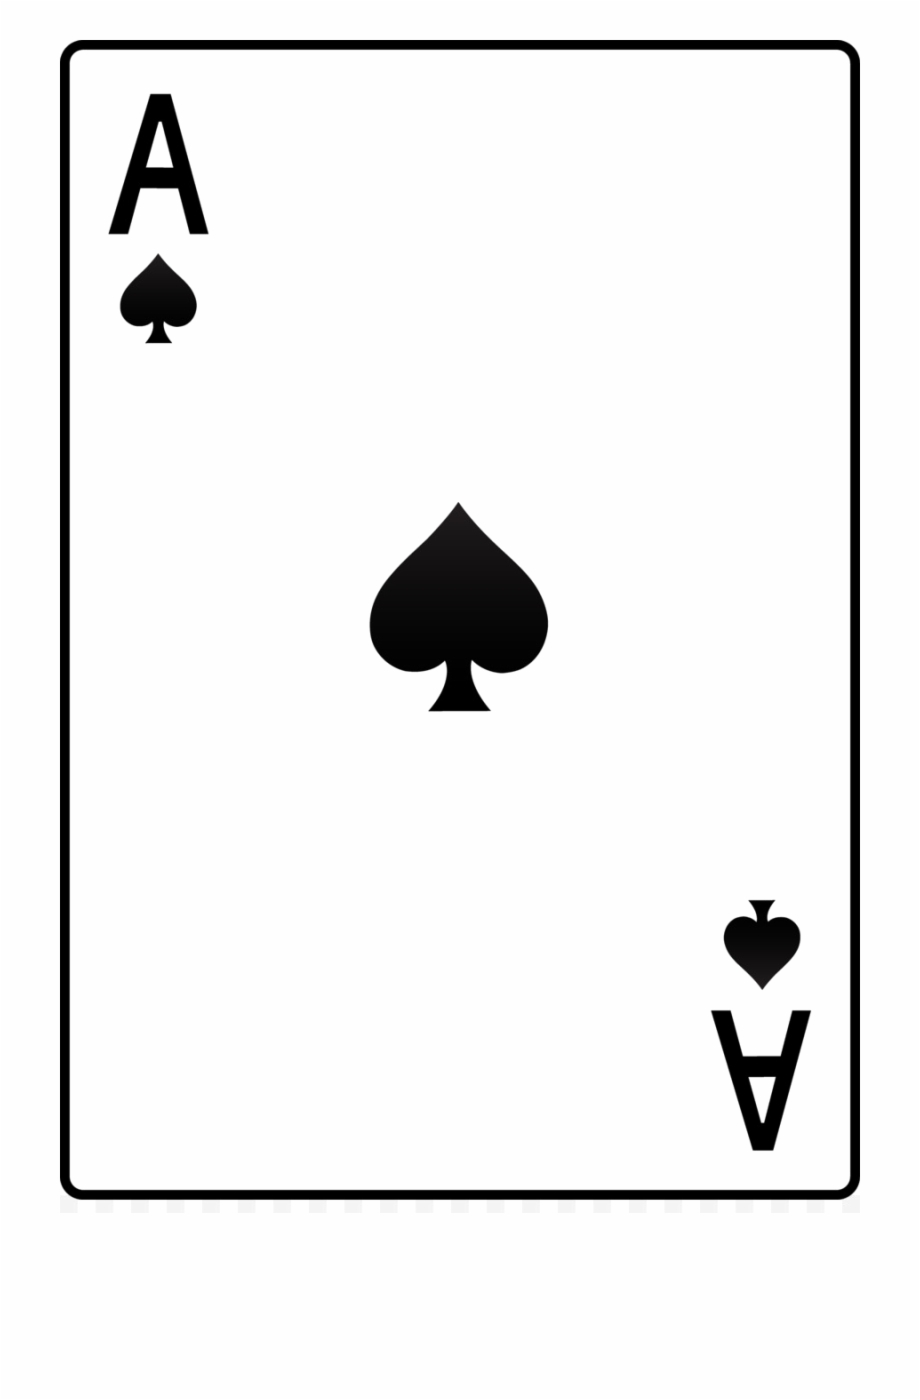 Ace Card Png Background Image Ace Playing Card